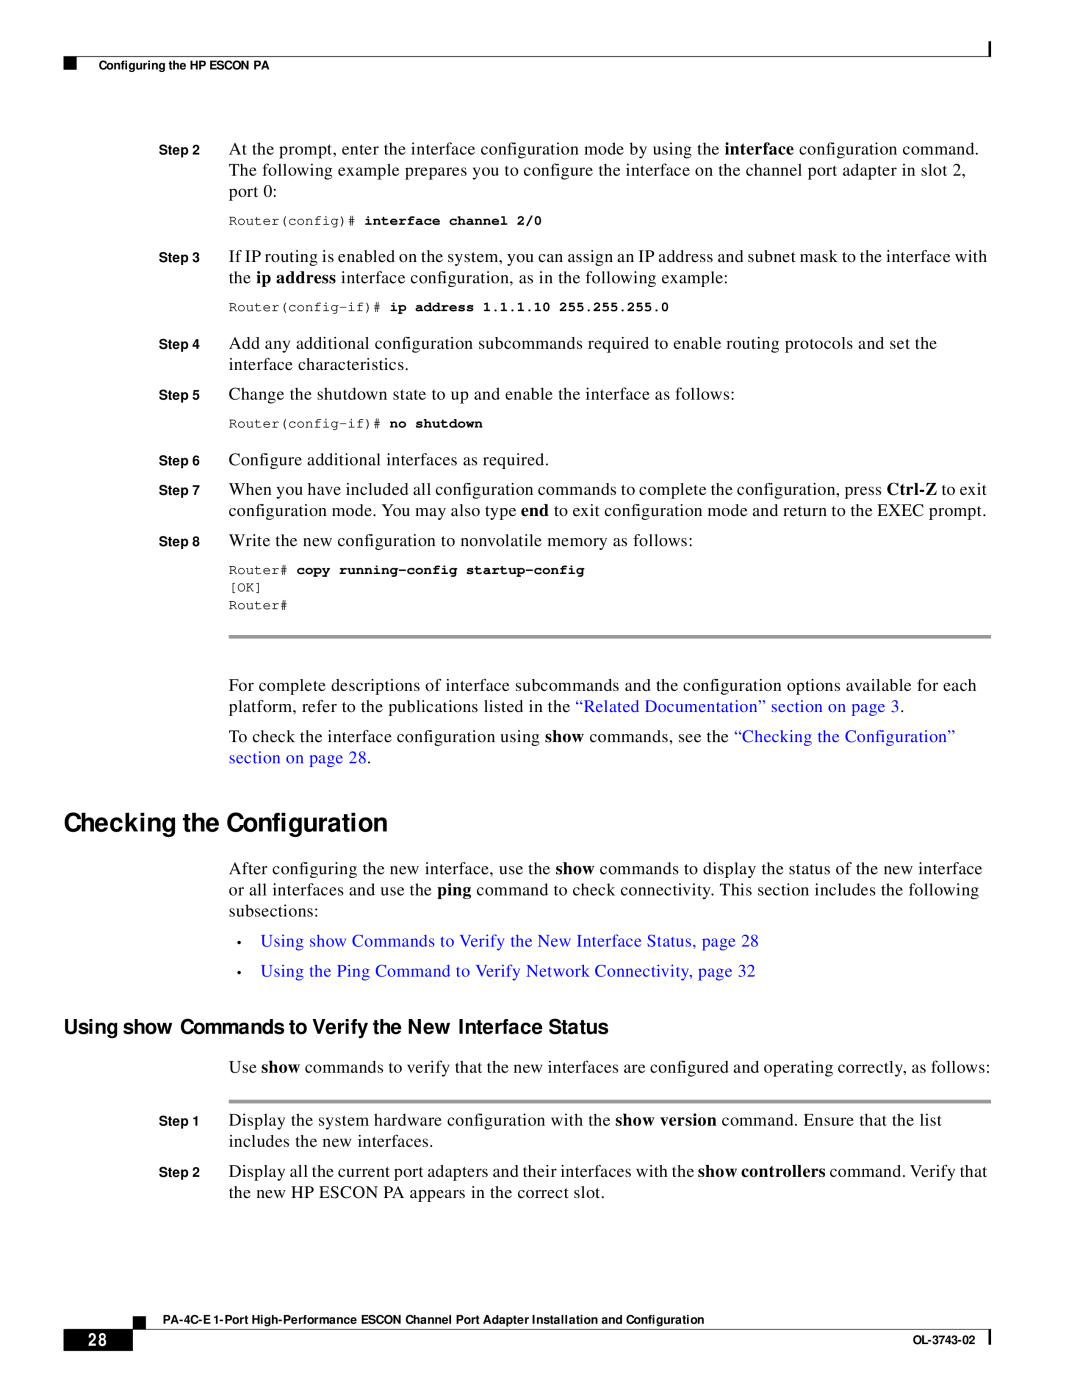 Cisco Systems PA-4C-E 1 manual Checking the Configuration, Using show Commands to Verify the New Interface Status 